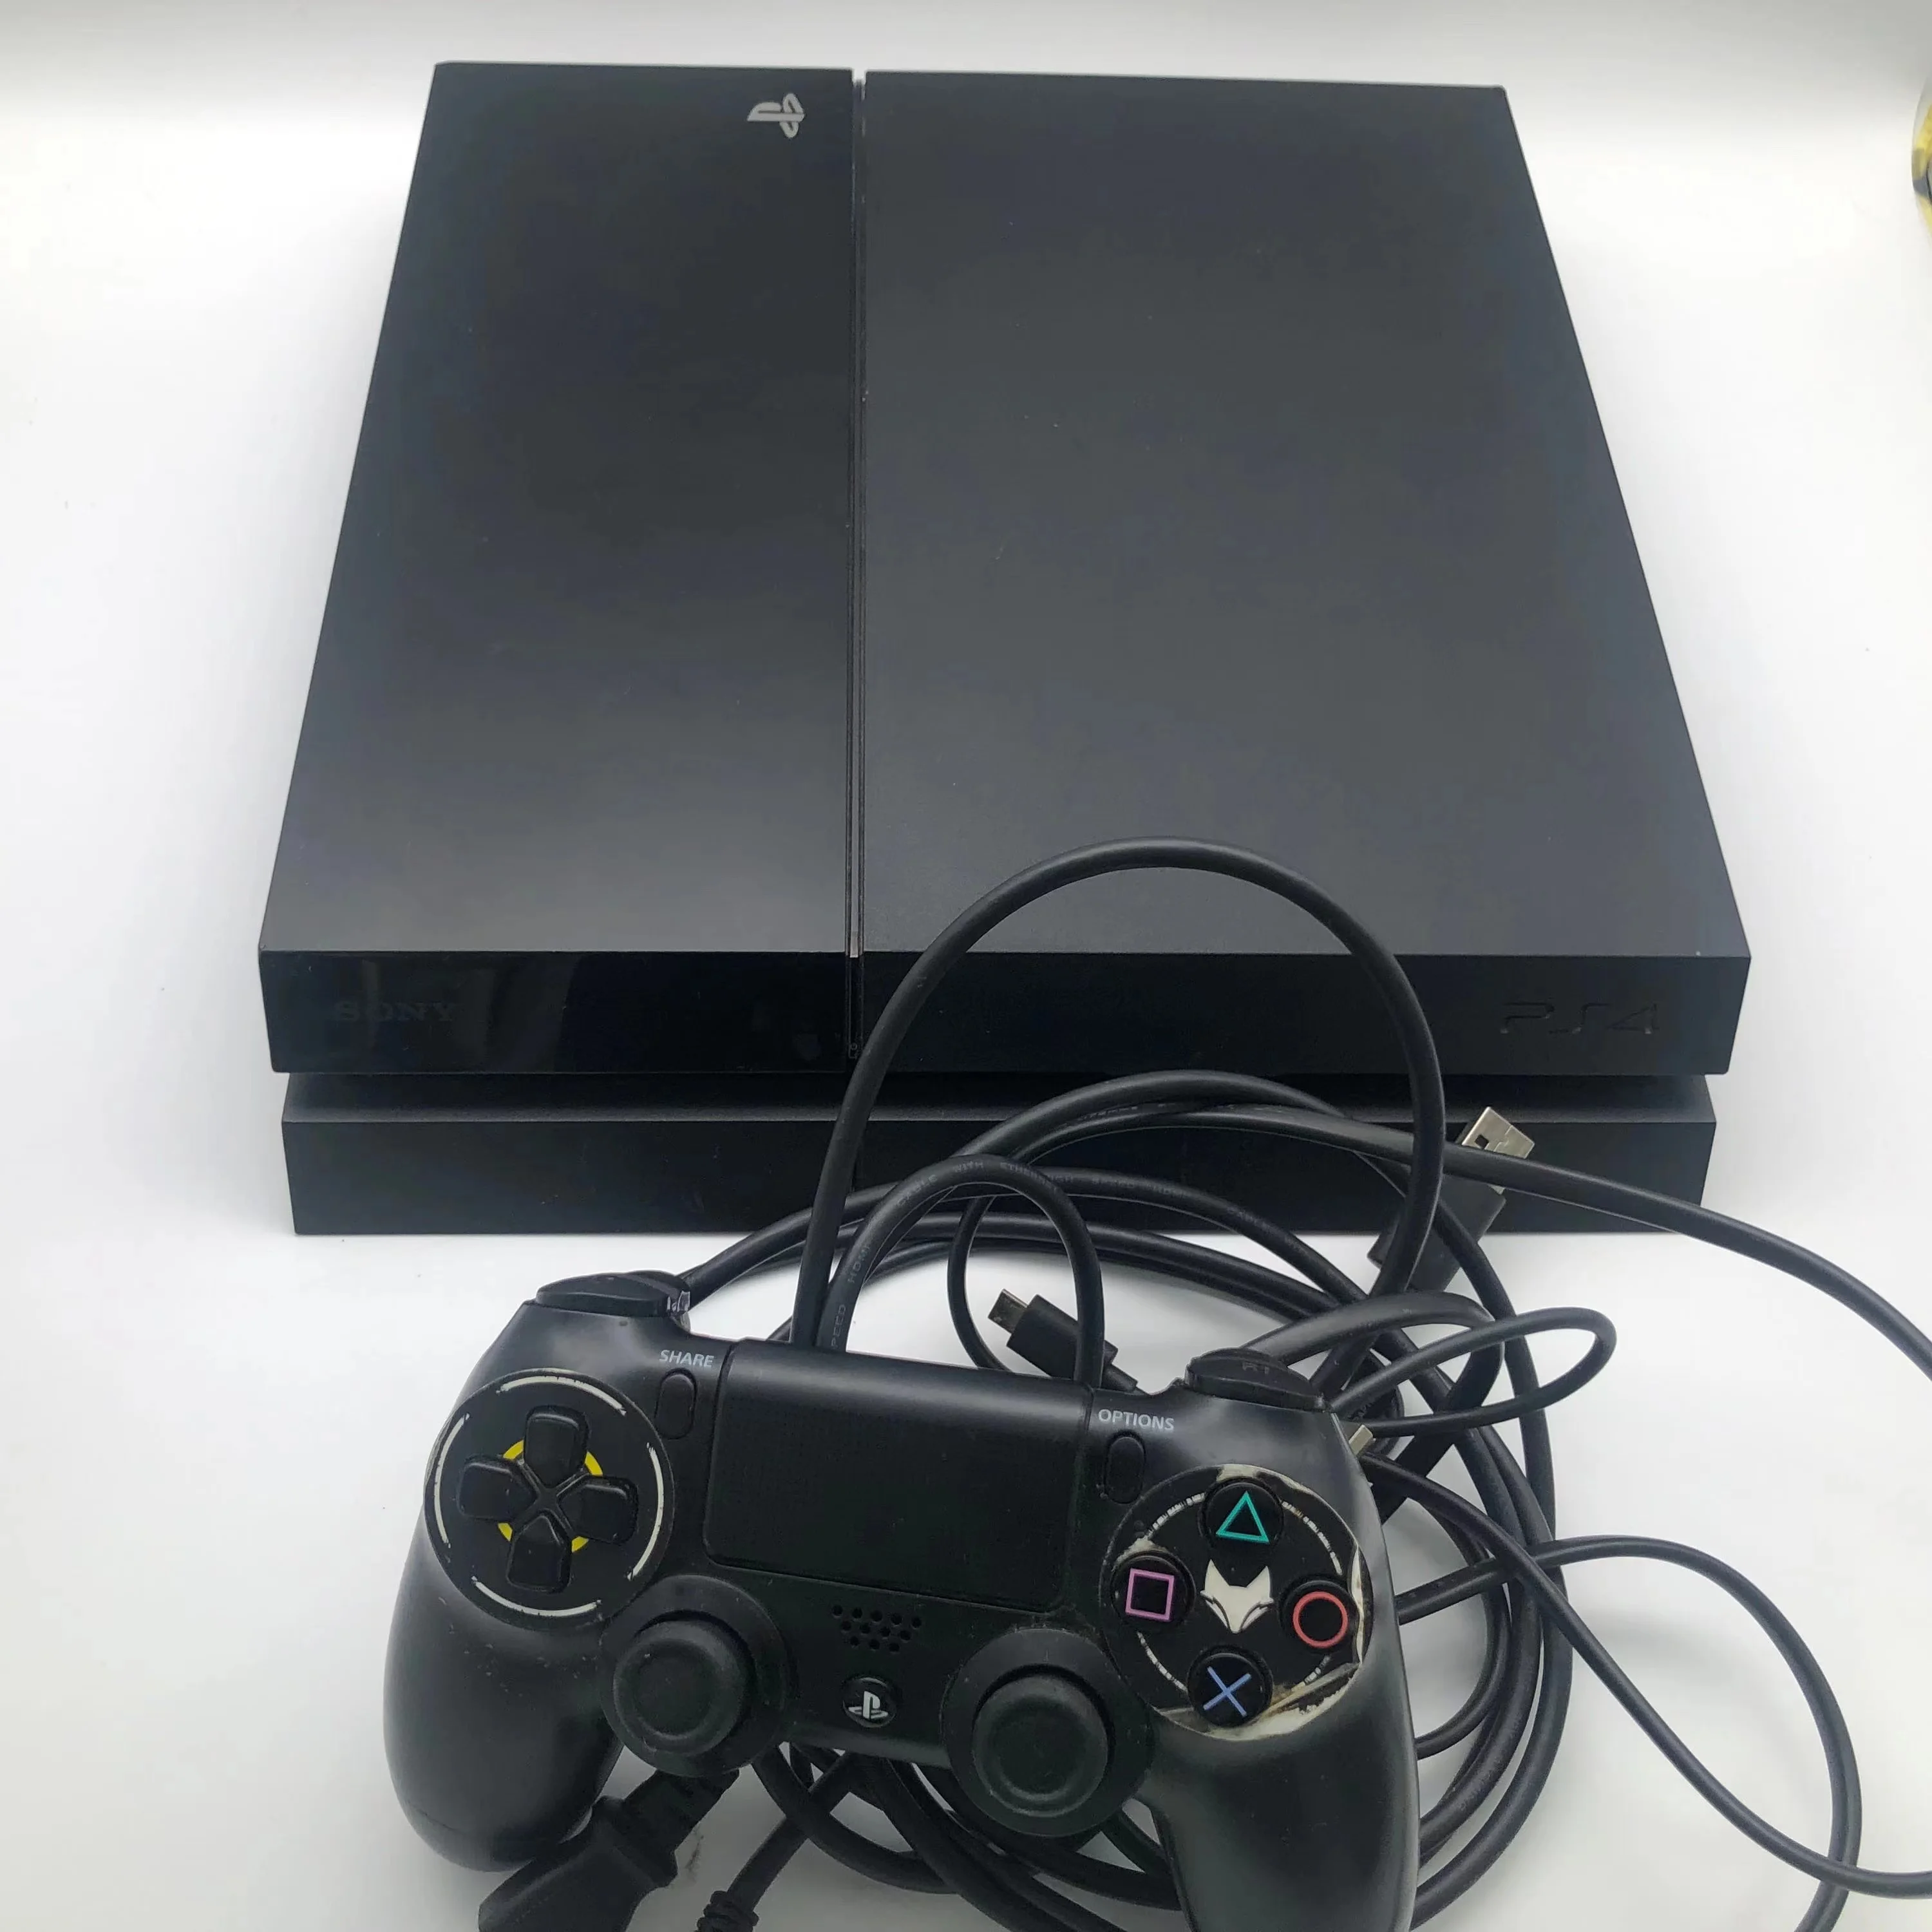 wholesale used original ps3 ps4 for| Alibaba.com